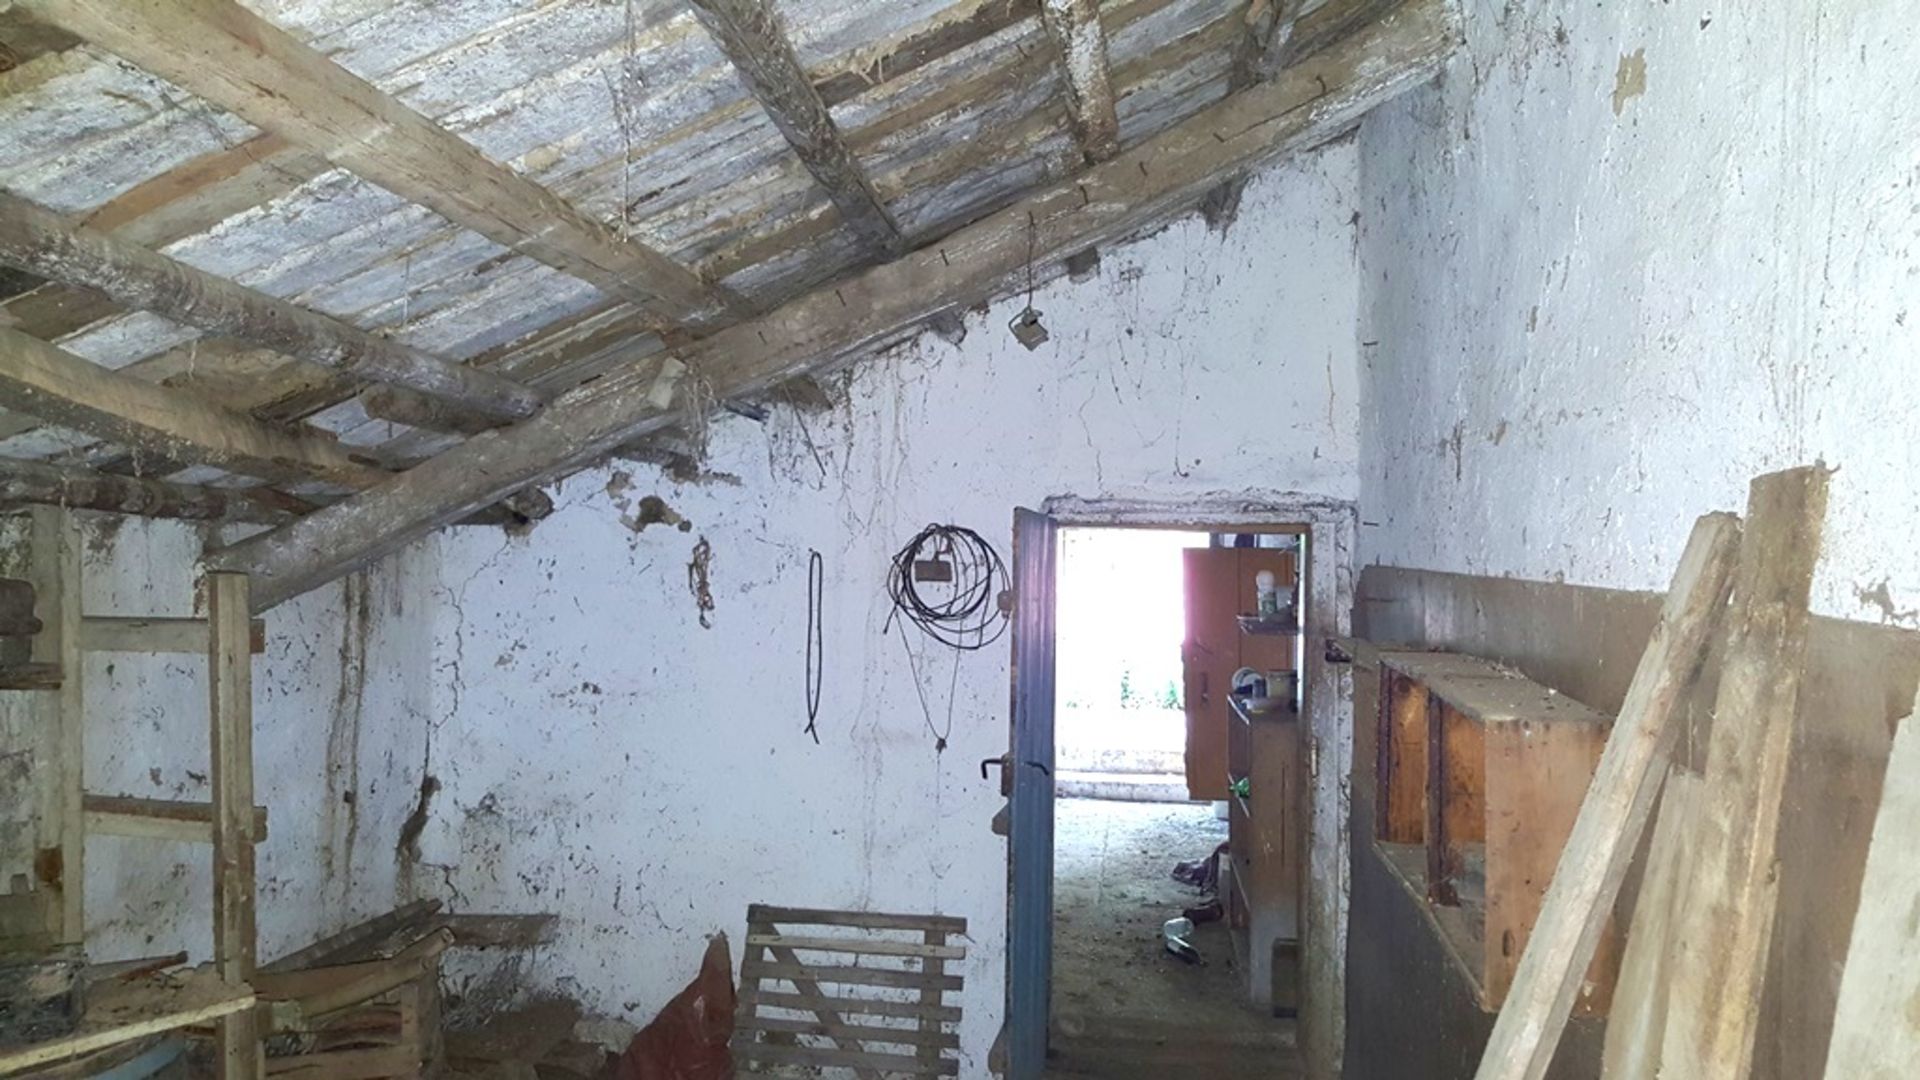 WISHING WELL COTTAGE Geshanovo, Dobrich, Bulgaria, 36 miles from Sea! - Image 24 of 59